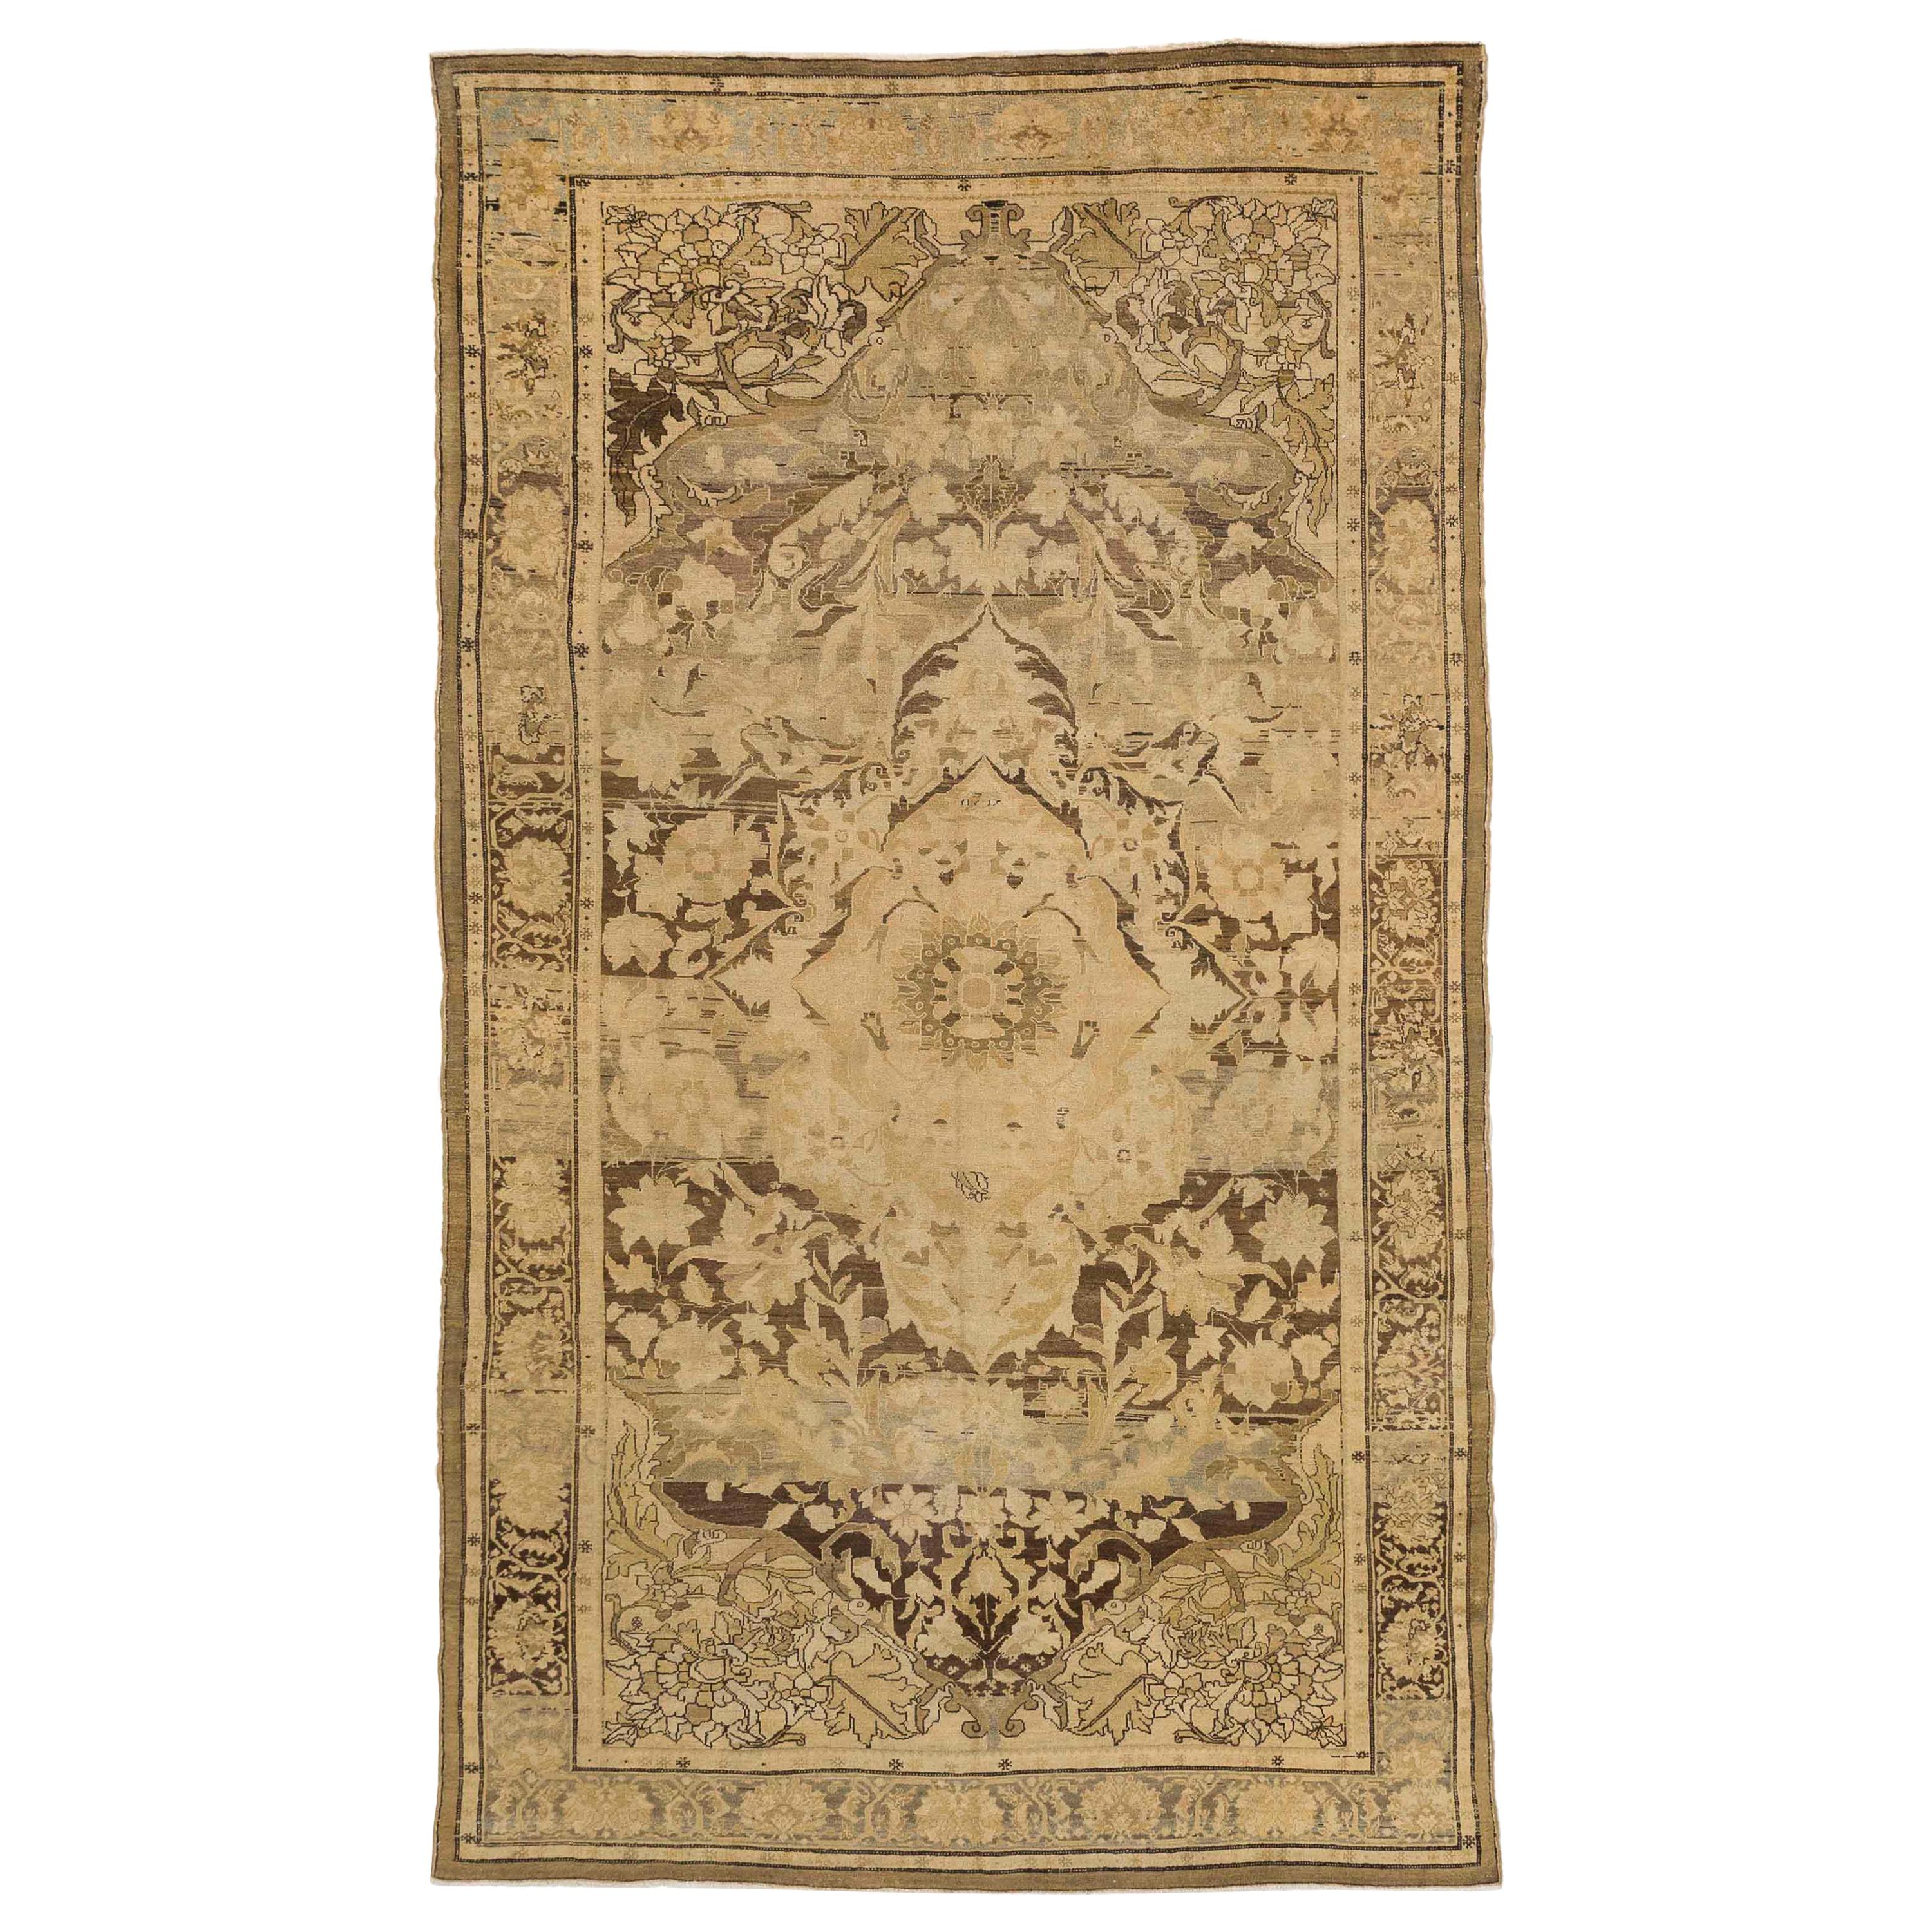 Antique Persian Rug Malayer Design with Rustic Floral Patterns, circa 1920s For Sale